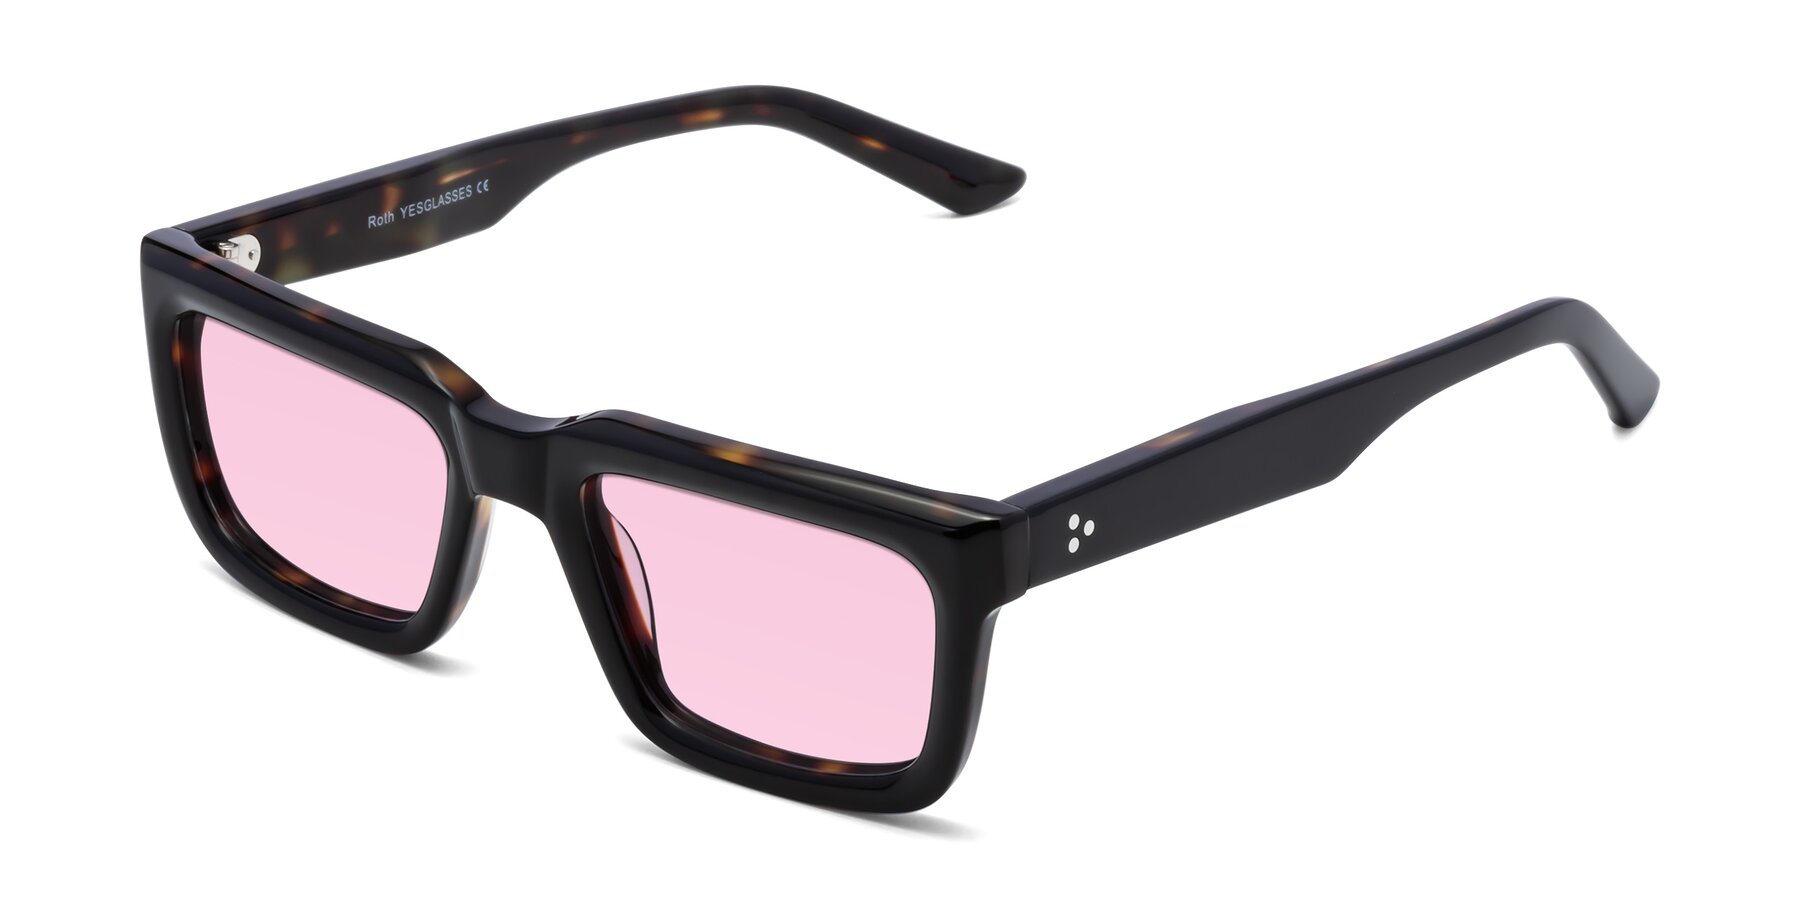 Angle of Roth in Black-Tortoise with Light Pink Tinted Lenses